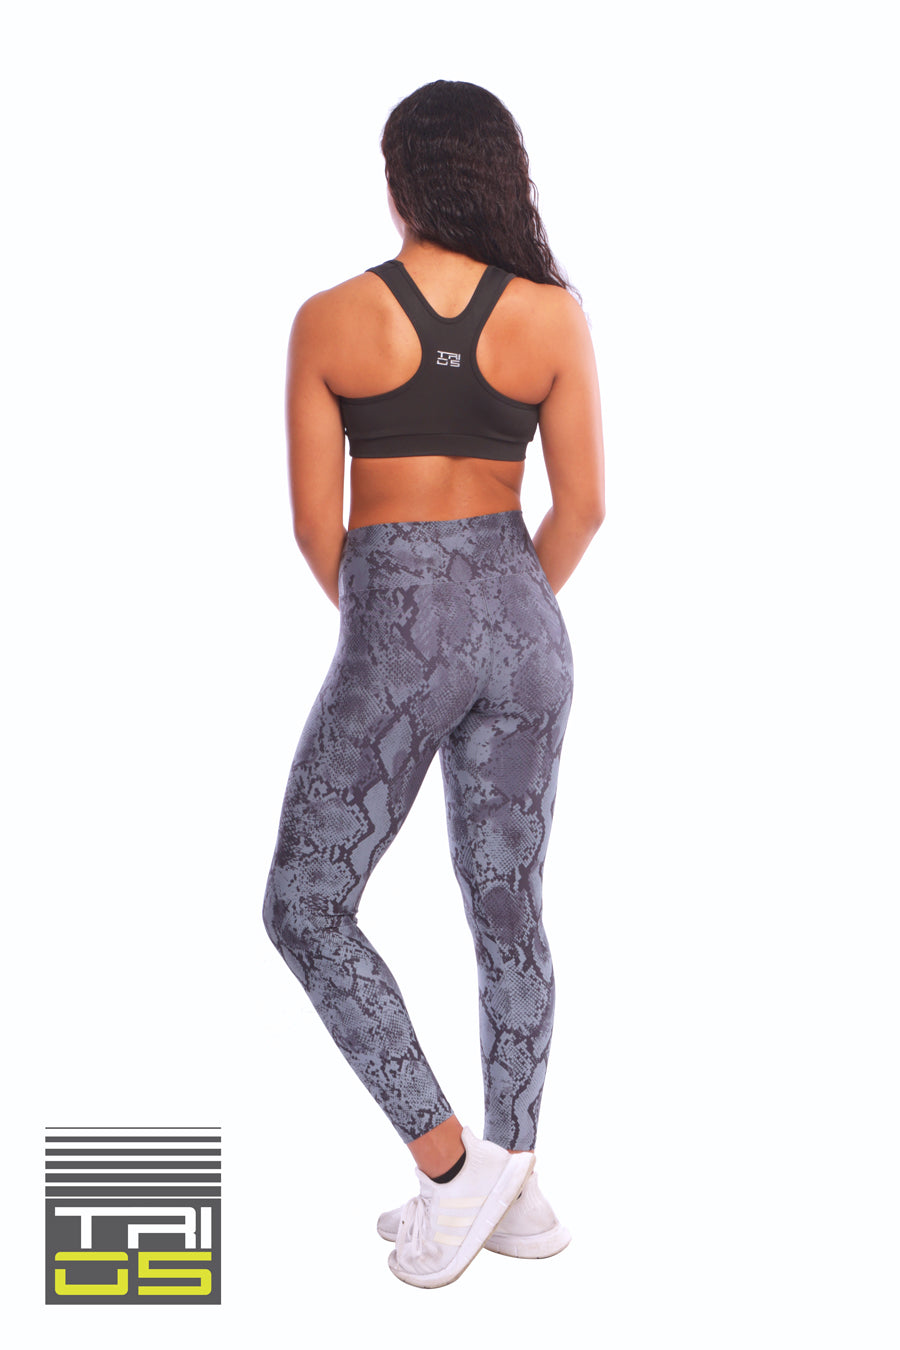 Printed Leggings High Waisted Black and Grey Color with Snake Skin Pattern  - Its All Leggings